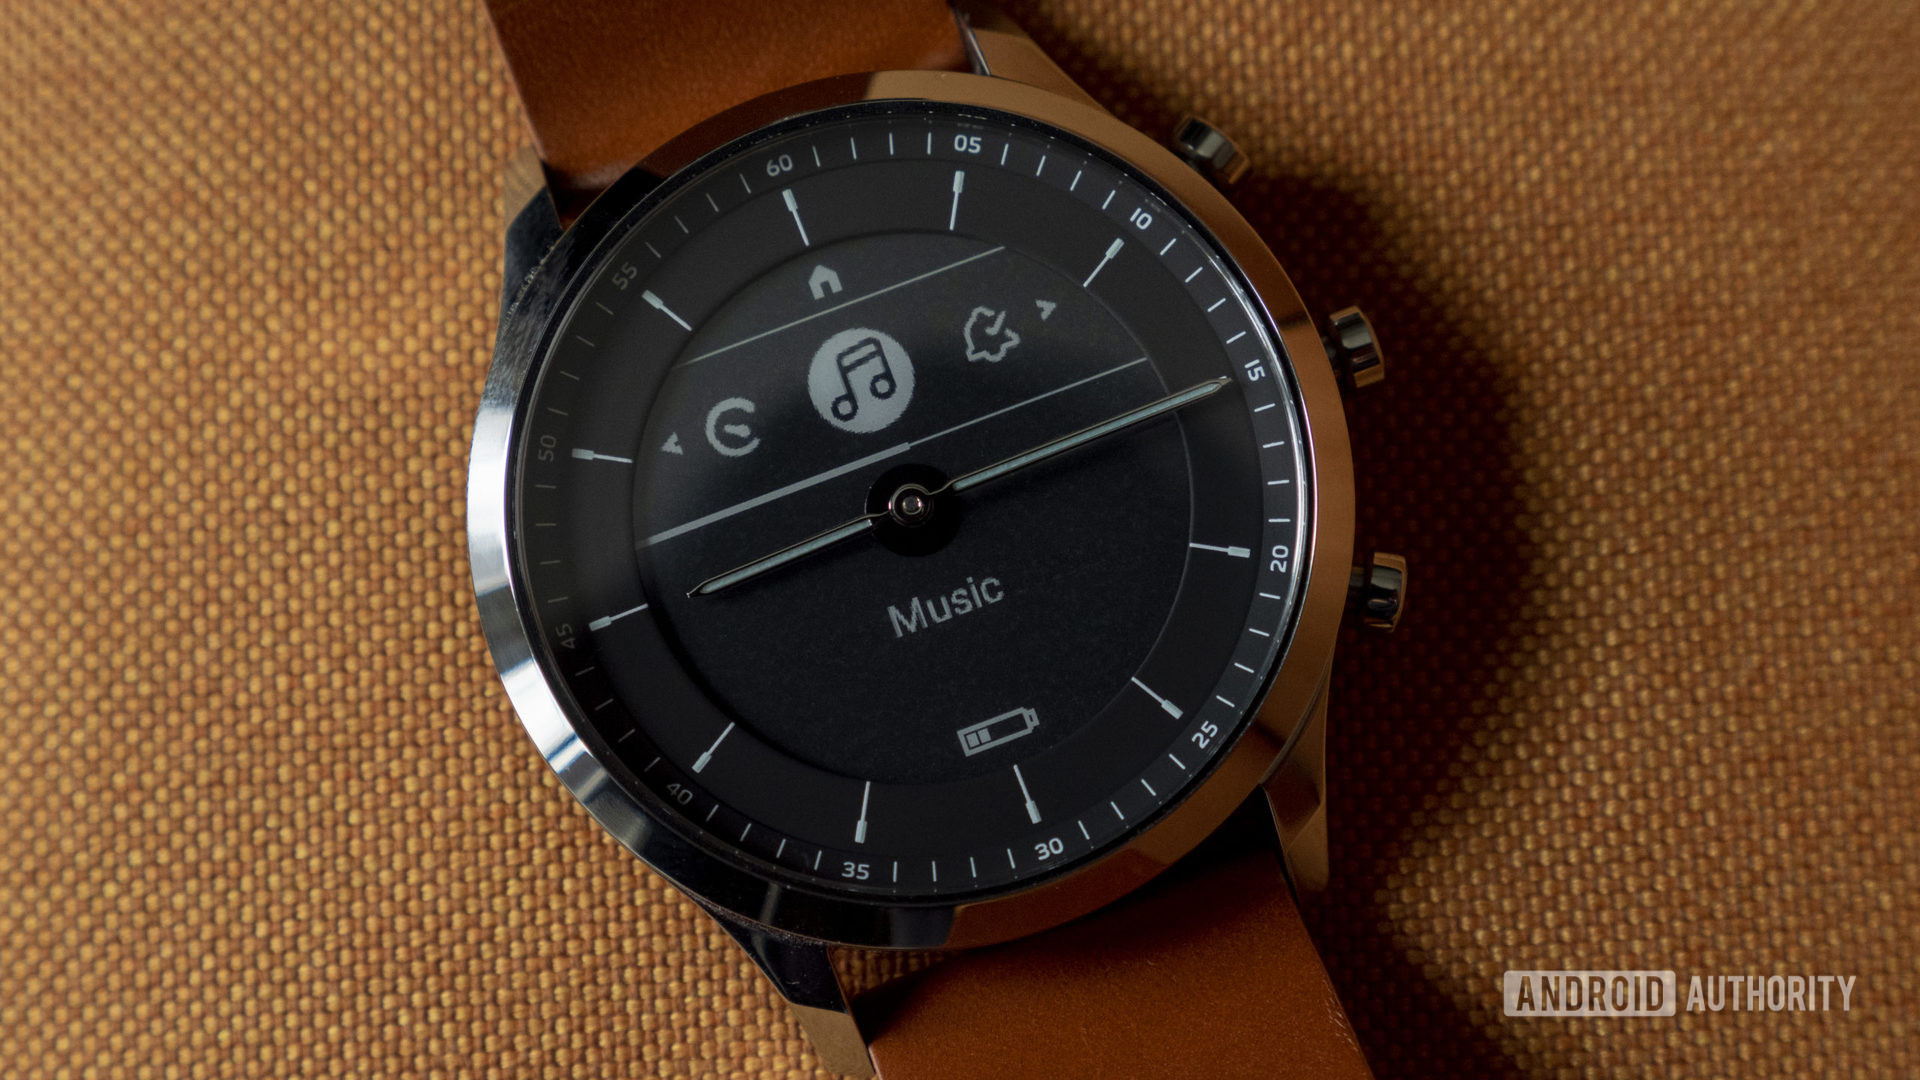 let Overhale Continental SKAGEN Jorn Hybrid HR review: Better than Fossil? - Android Authority